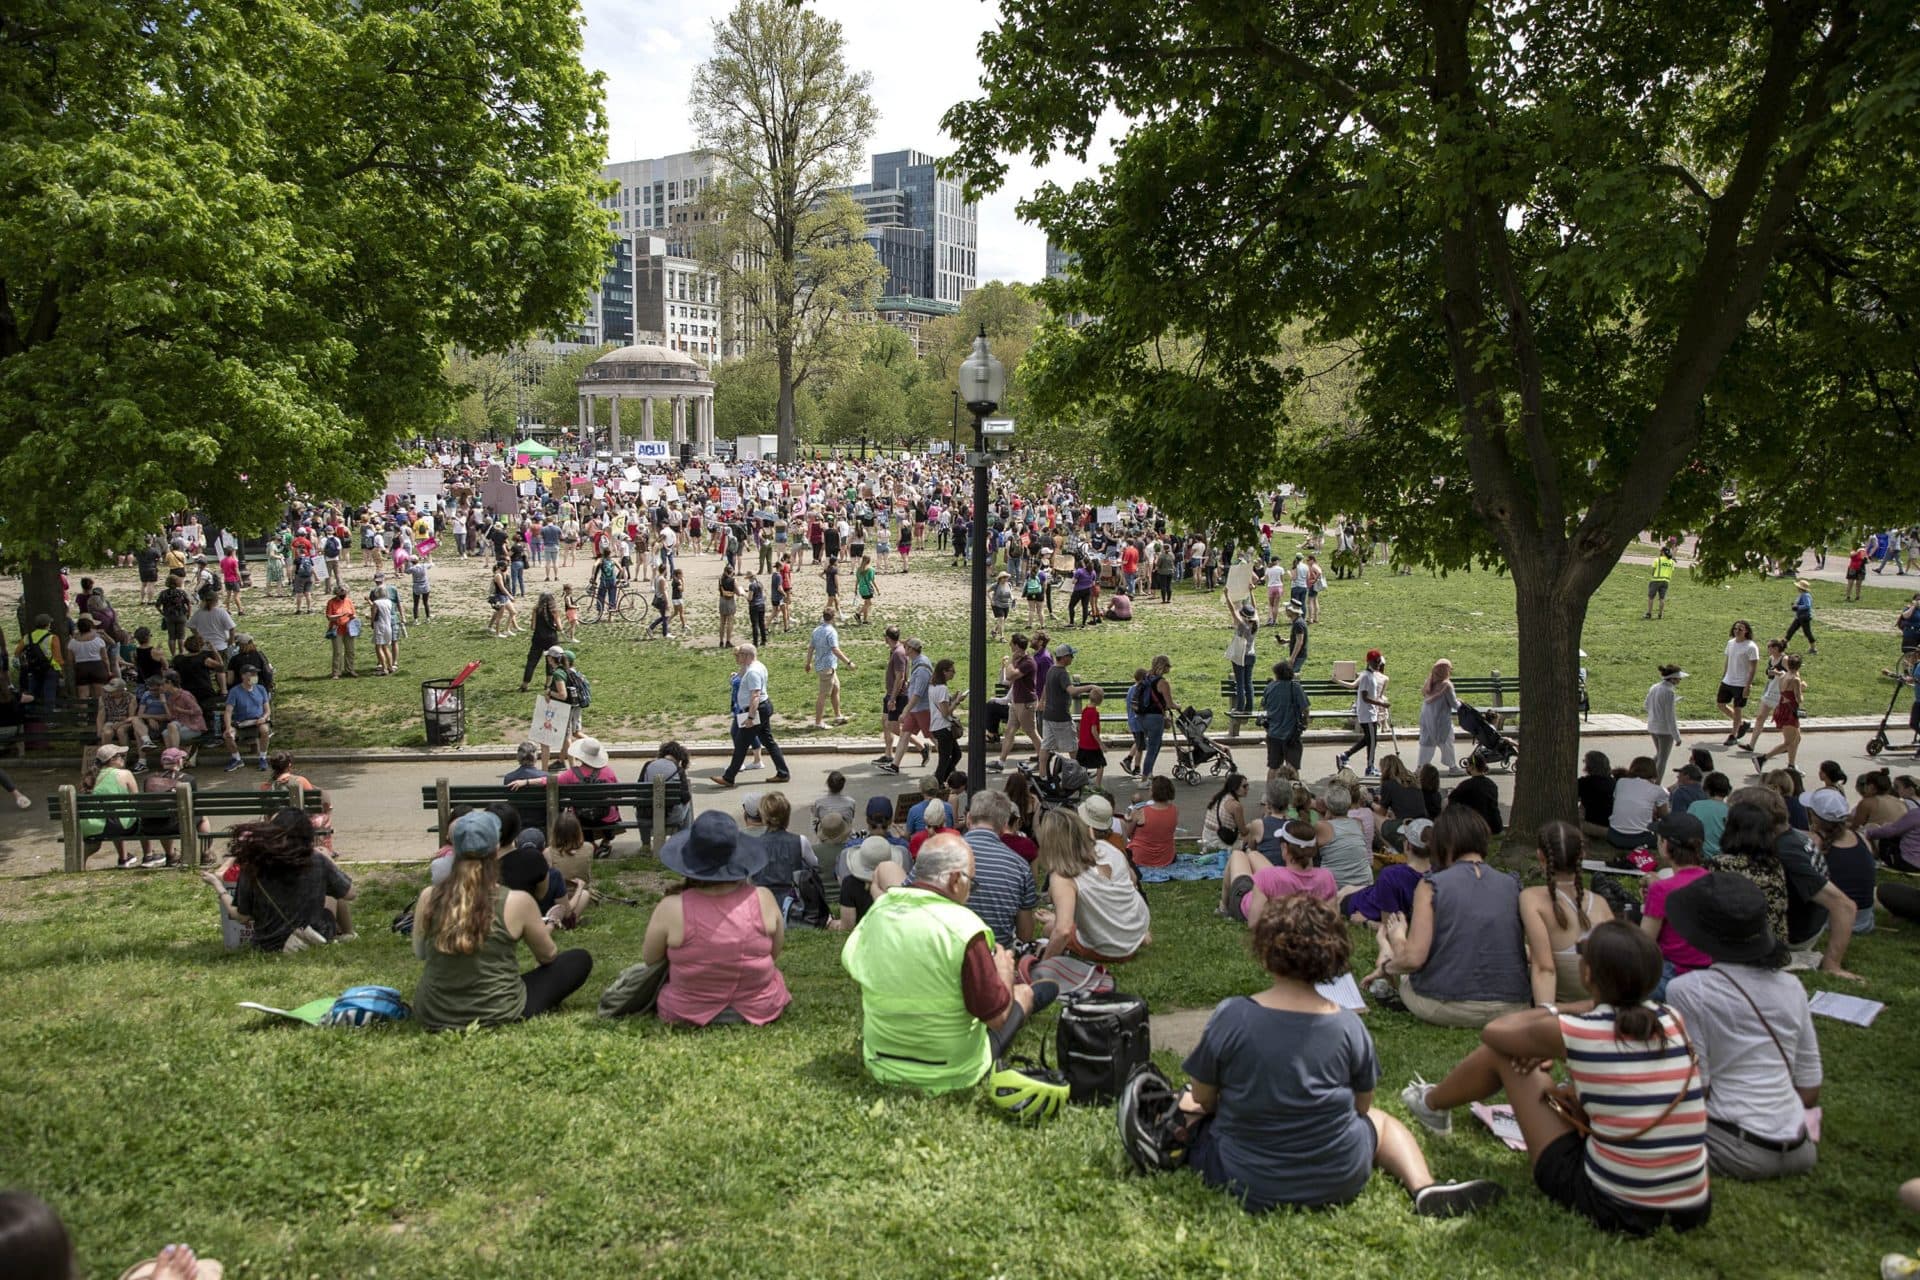 Protesters sit in shade of trees around the bandstand at the Bans Off Our Bodies rally on Boston Common. (Robin Lubbock/WBUR)